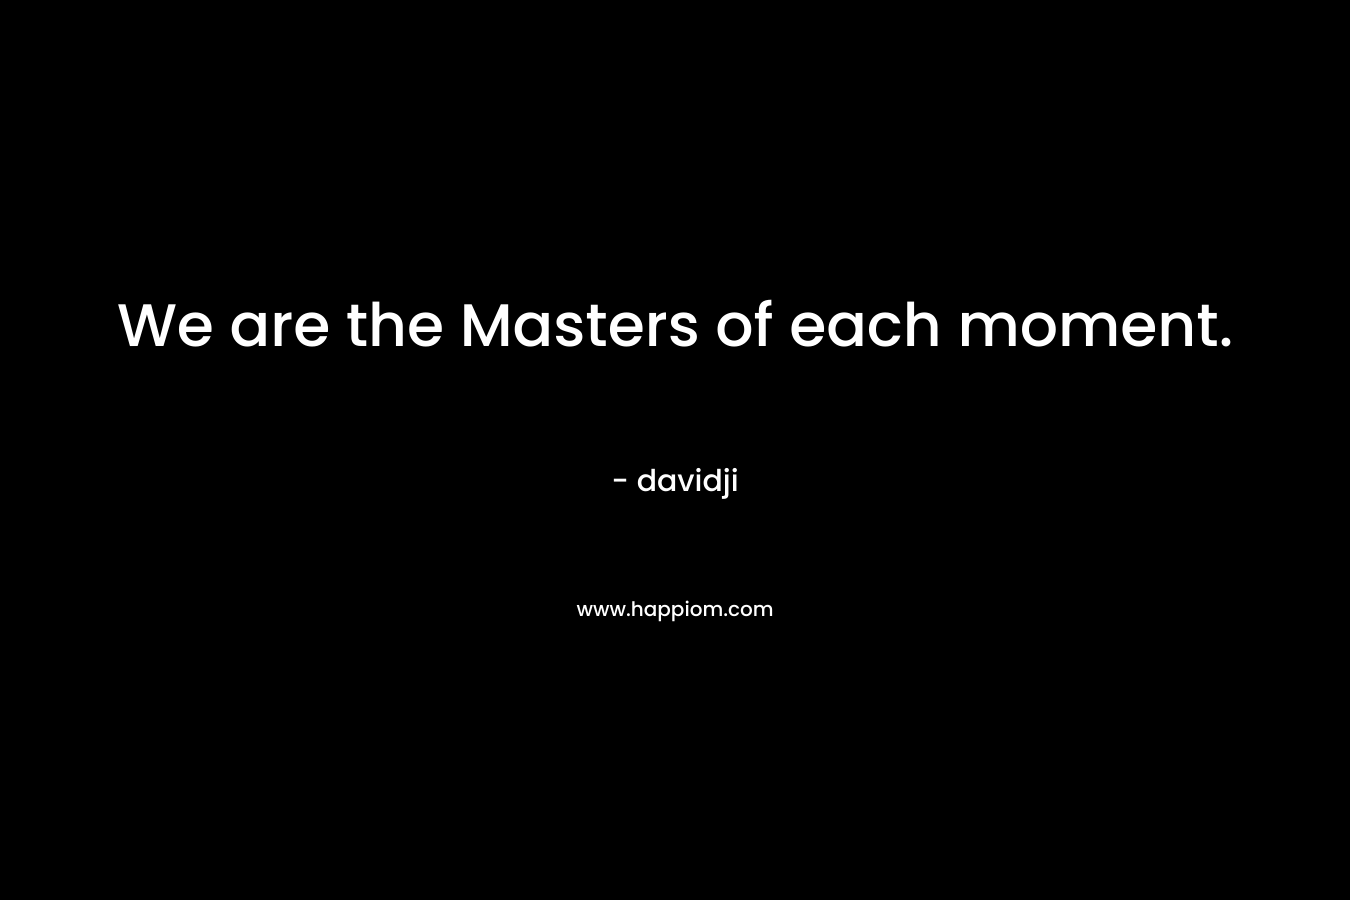 We are the Masters of each moment.